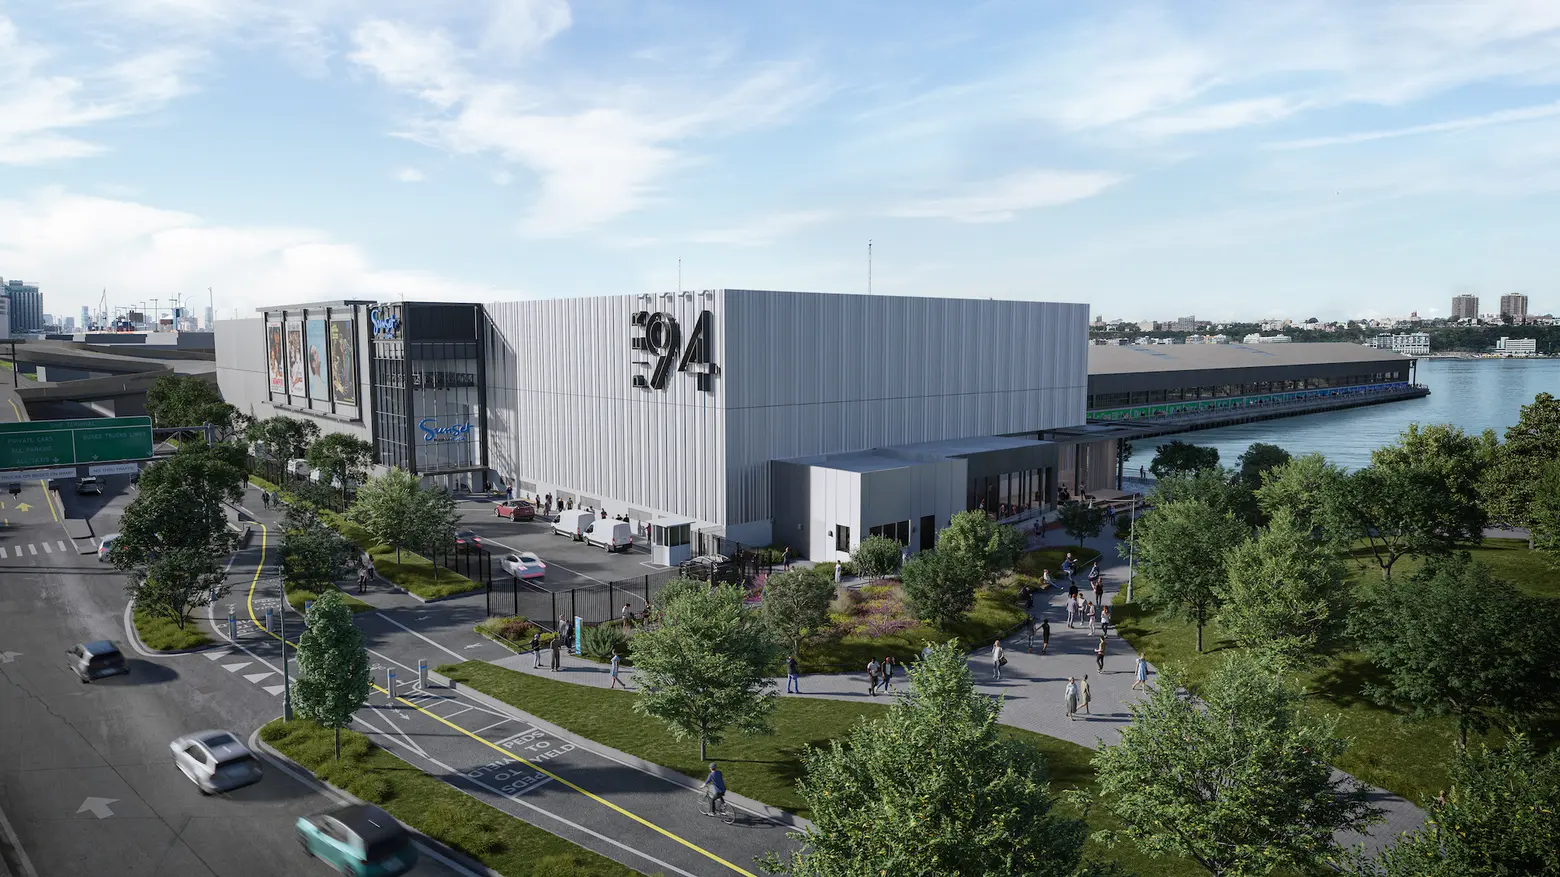 Manhattan’s first-ever film and TV studio coming to Pier 94